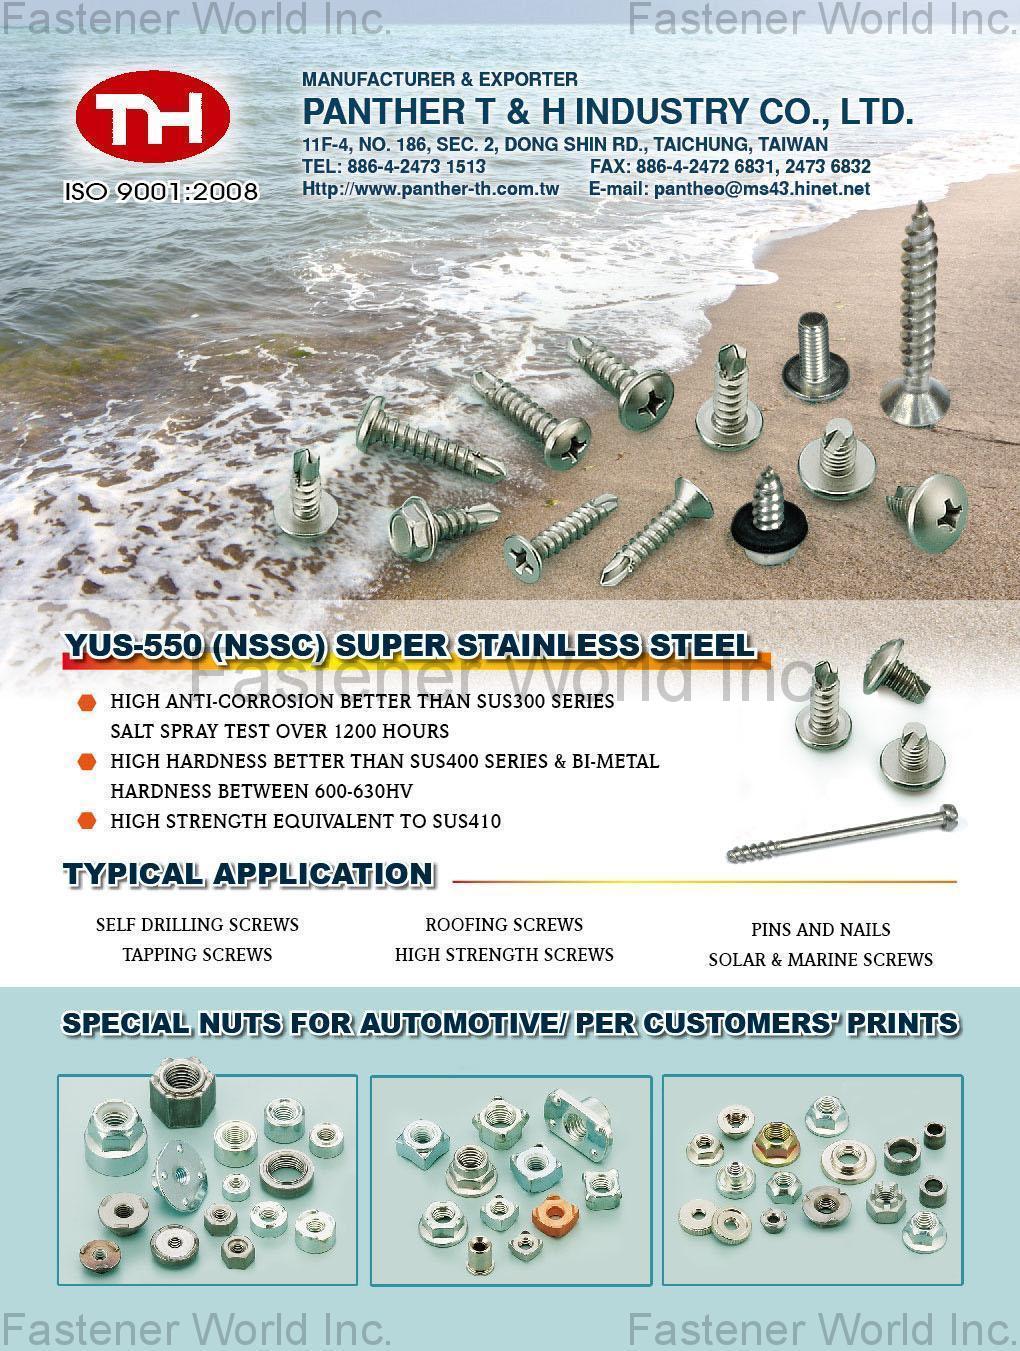 PANTHER T & H INDUSTRY CO., LTD.  , YUS 550 (NSSC) Super Stainless Steel, Self Drilling Screws, Roofing Screws, Pins & Nails, Tapping Screws, High Strength Screws, Solar & Marine Screws , Stainless Steel